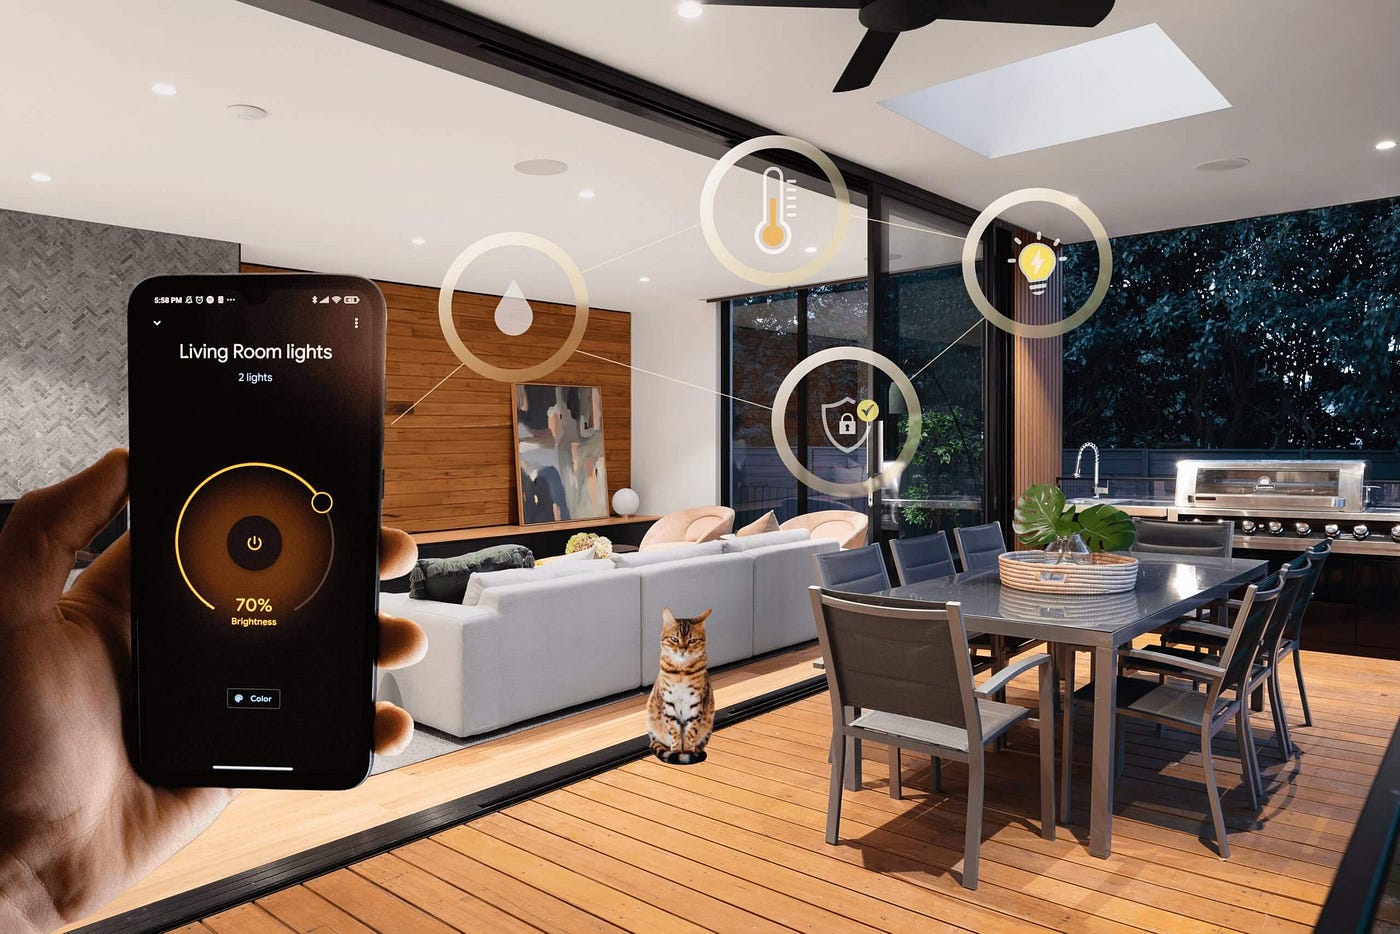 How IoT Home Automation Works